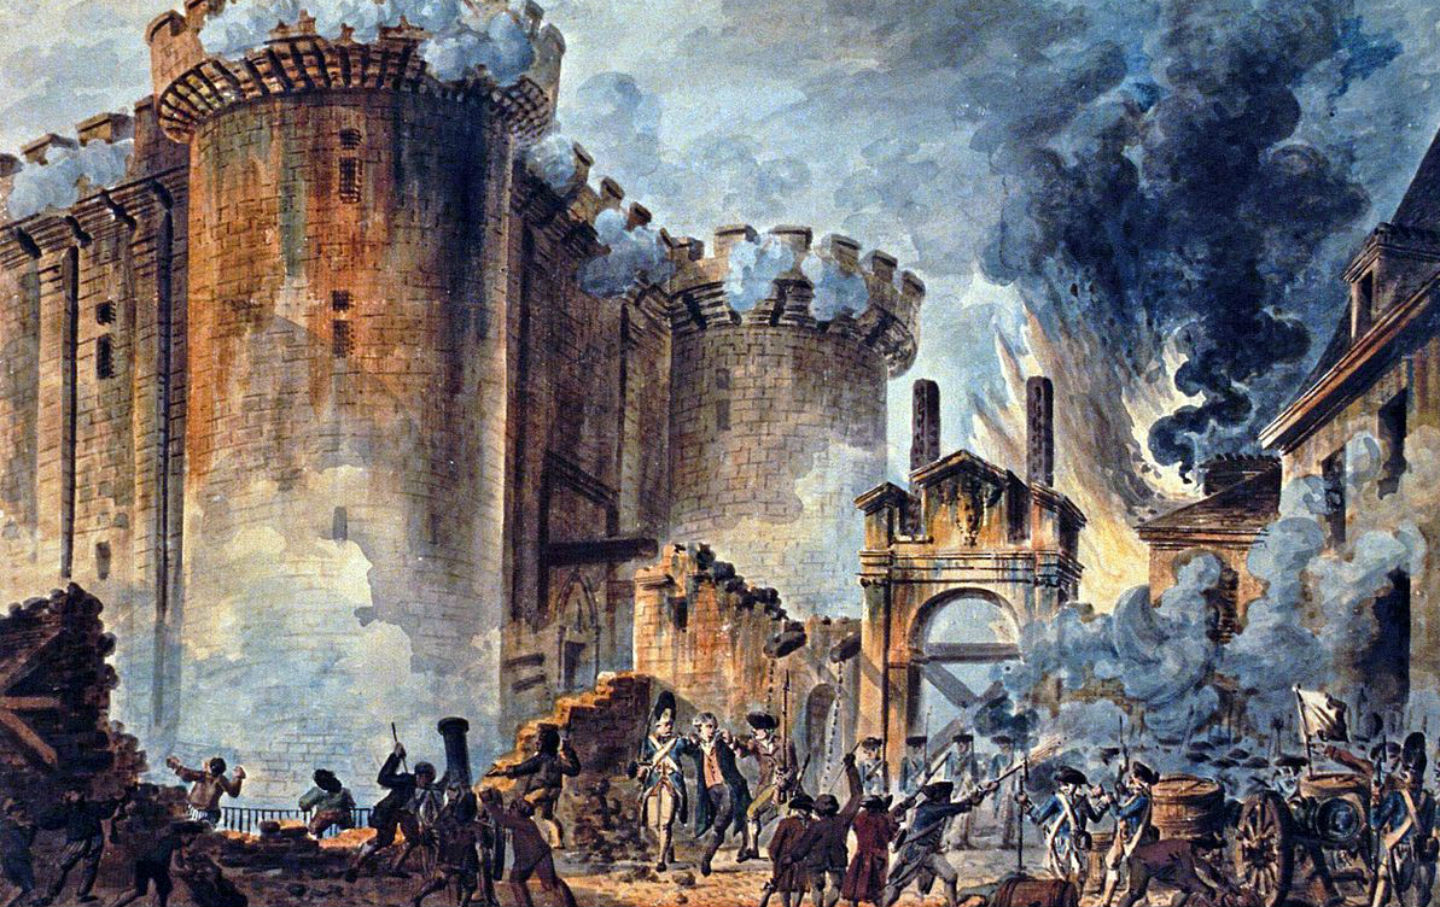 July 14, 1789: French Revolutionaries Storm the Bastille